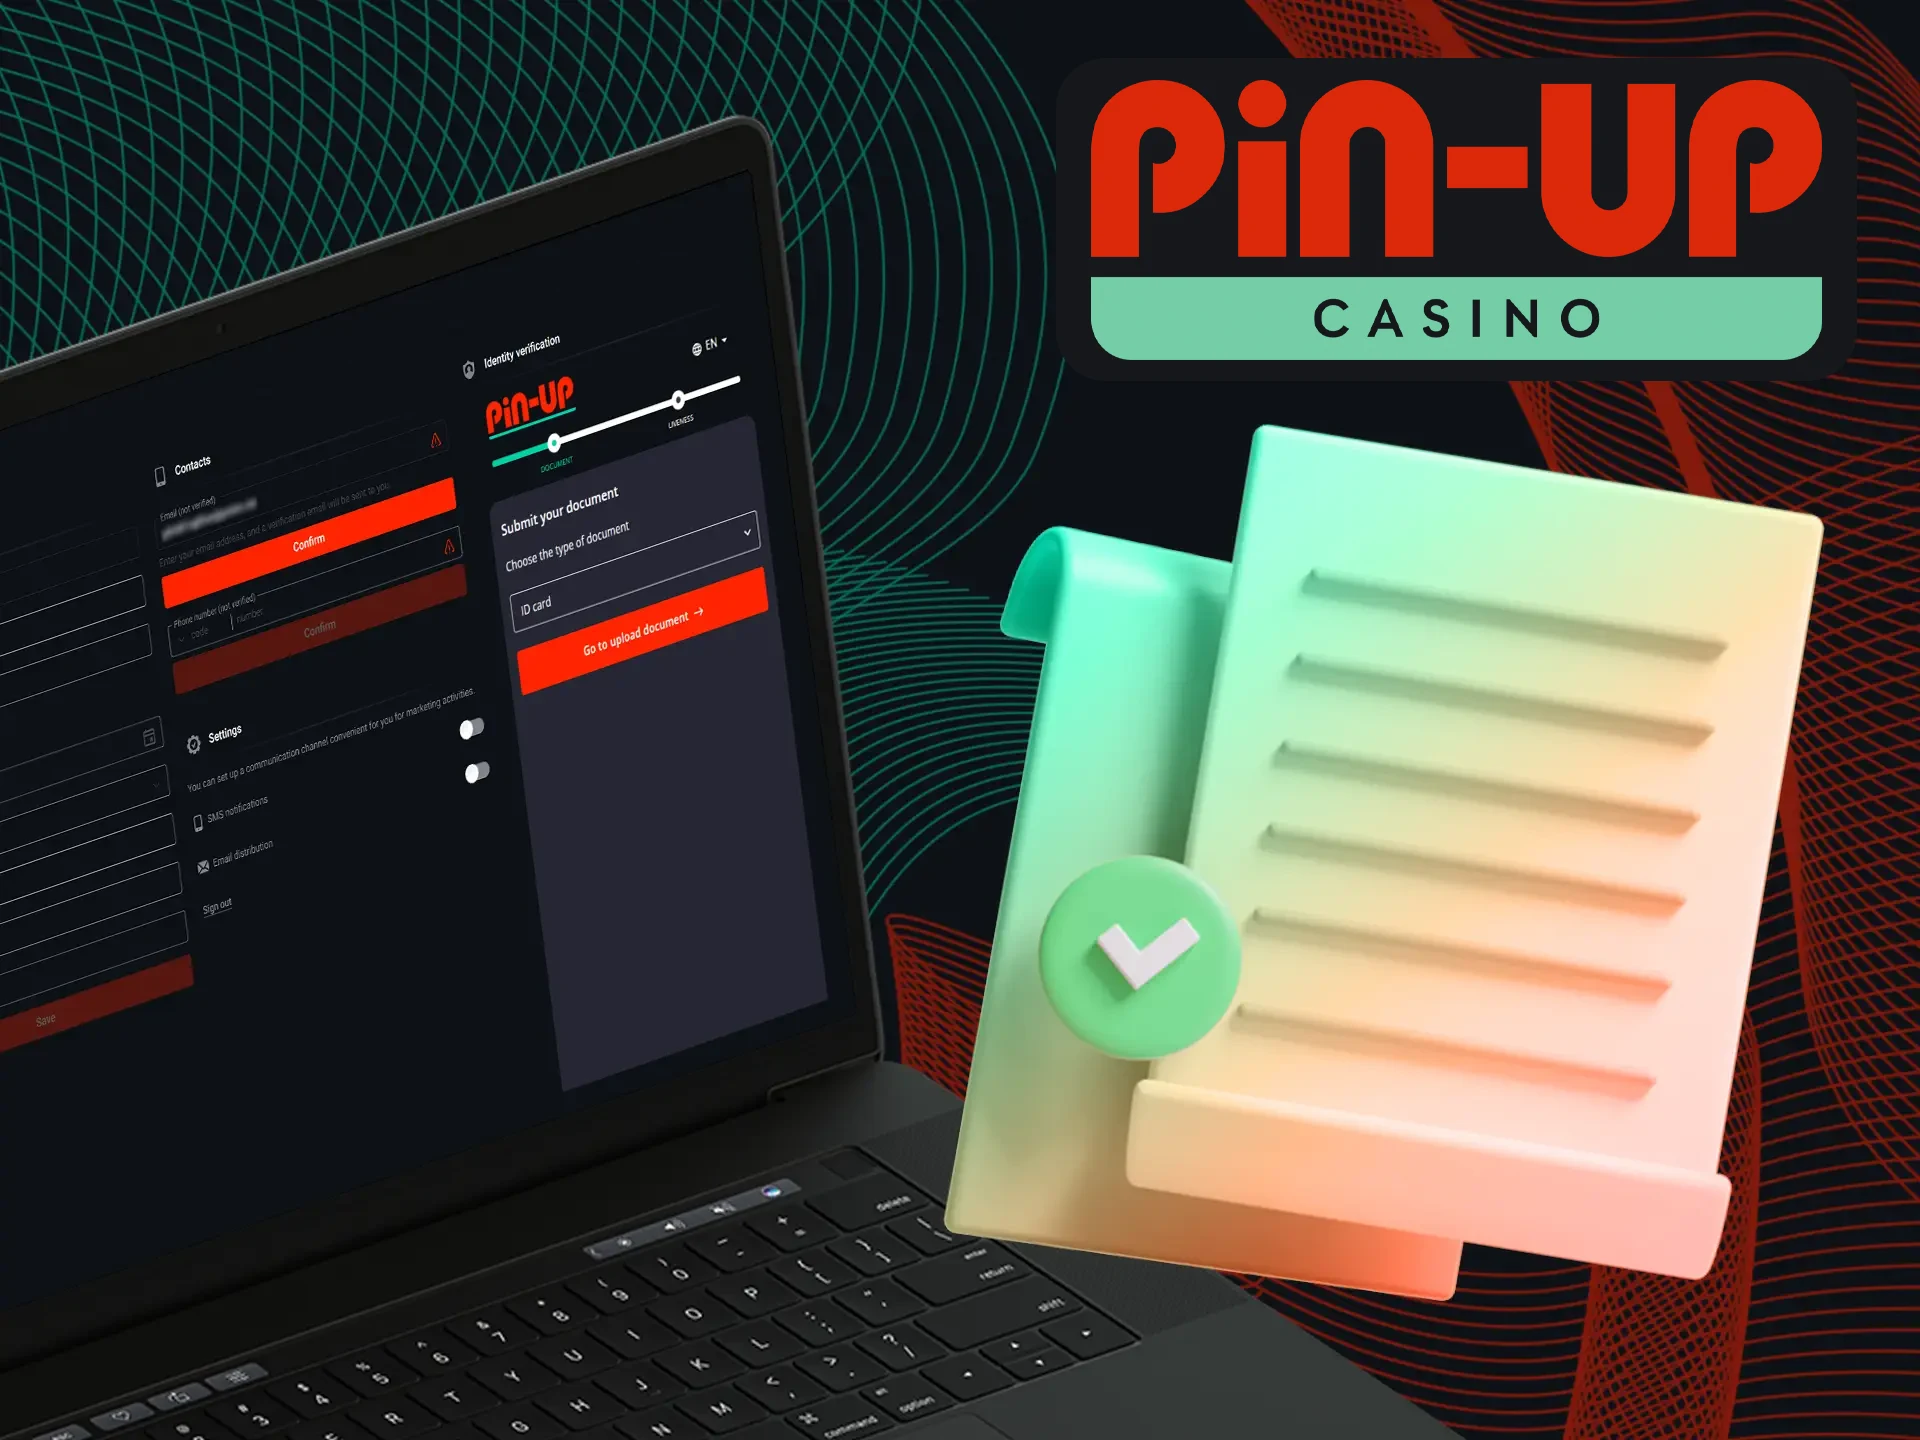 For compliance with KYC regulations, account verification is required by Pin-Up Casino before initiating any cash withdrawals.